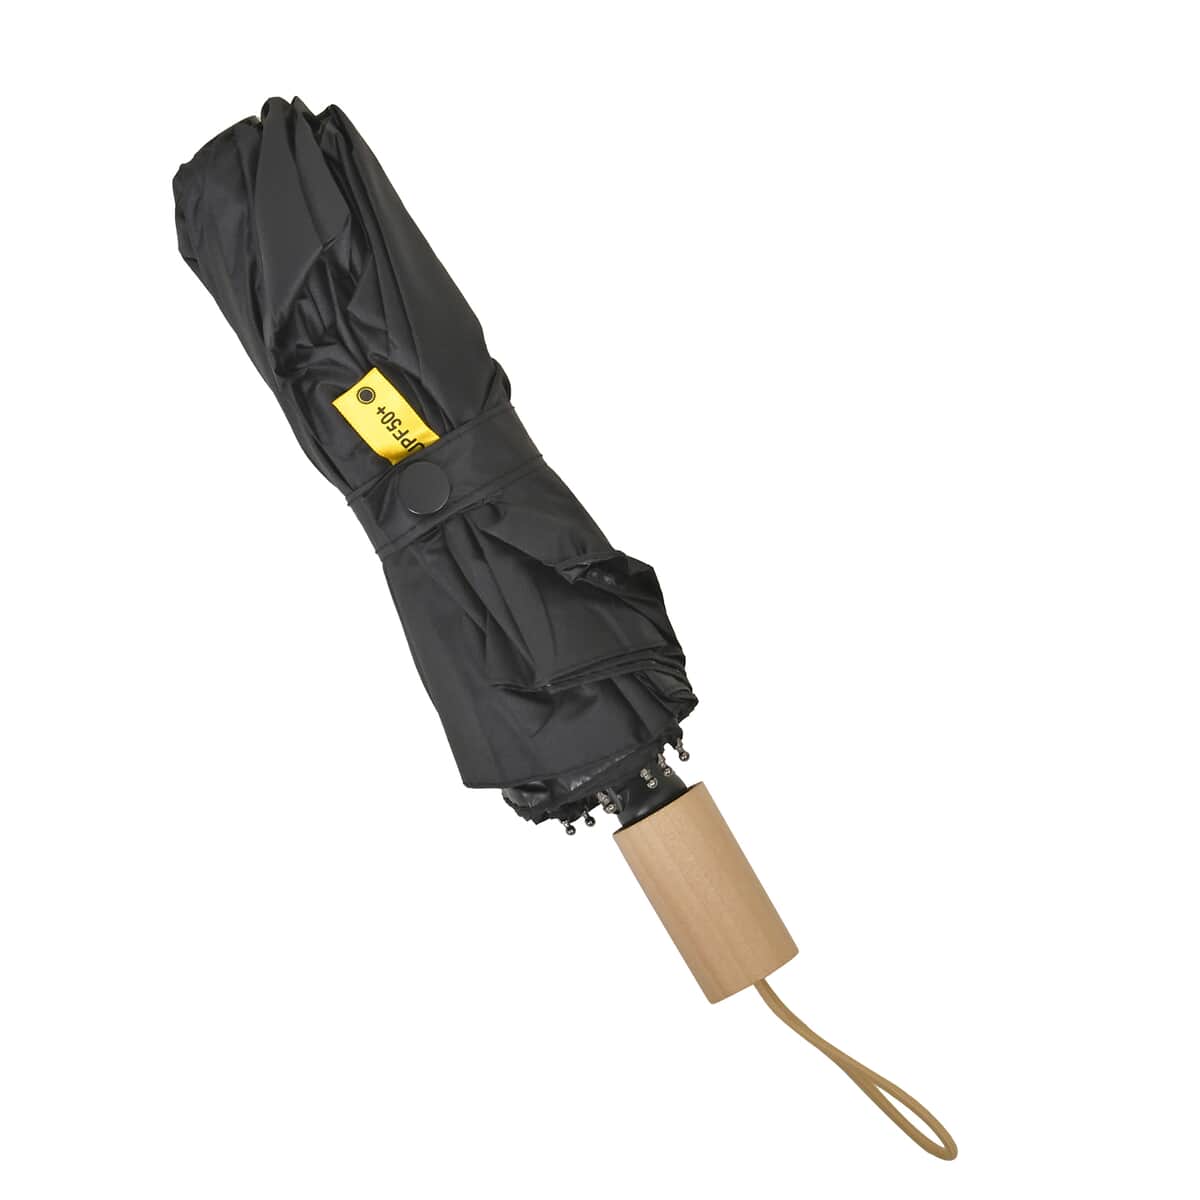 Black Folding Sun Umbrella with 10 Ribs (Inside Black Coating Can Provide UPF 50+ Protection) image number 0